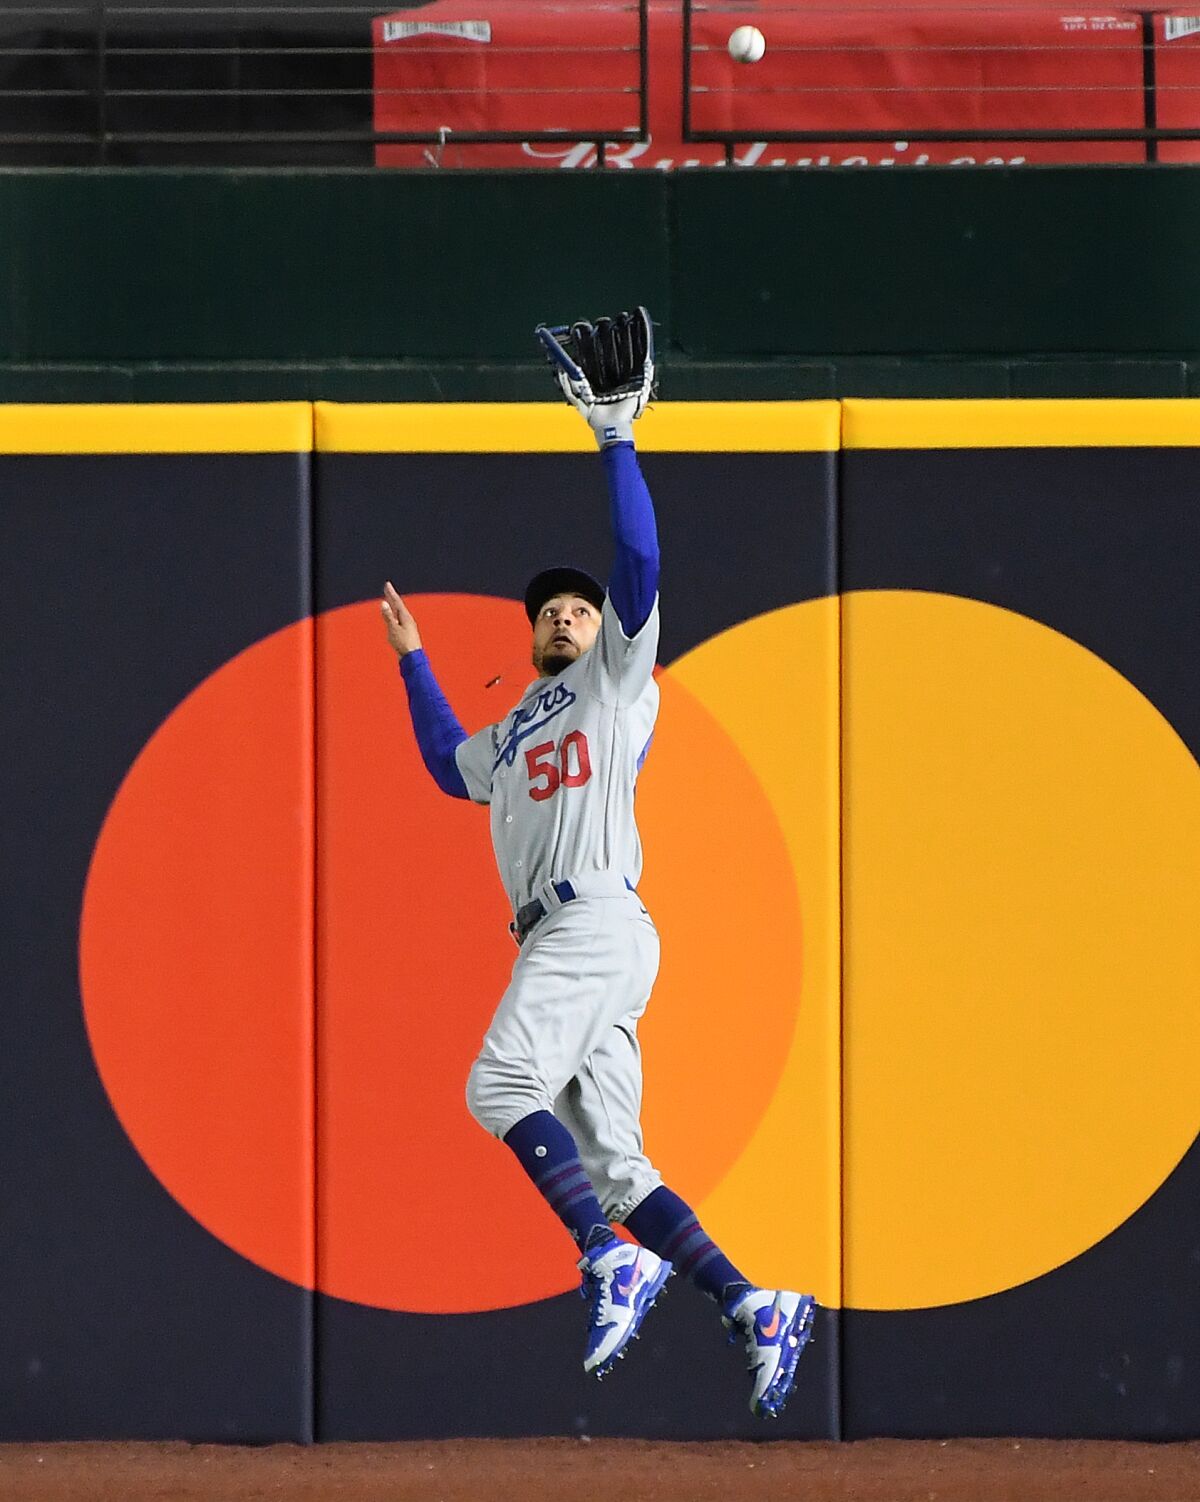 Dodgers right fielder Mookie Betts makes a leaping catch off the bat of Brandon Lowe during the second inning of Game 4.